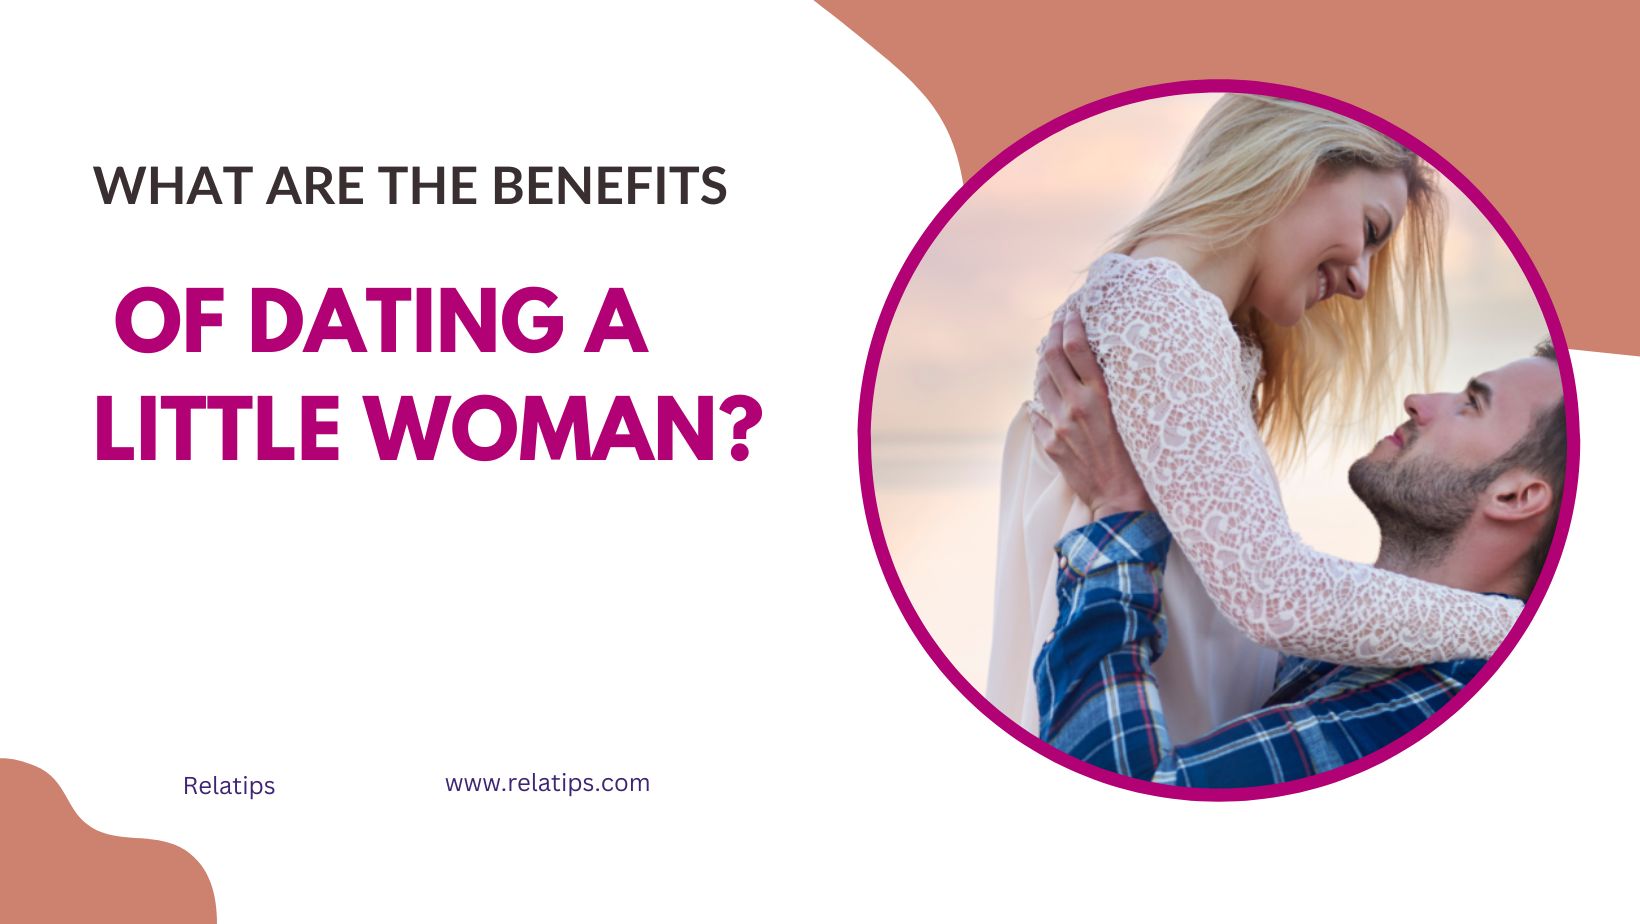 What Are the Benefits of Dating a Little Woman?